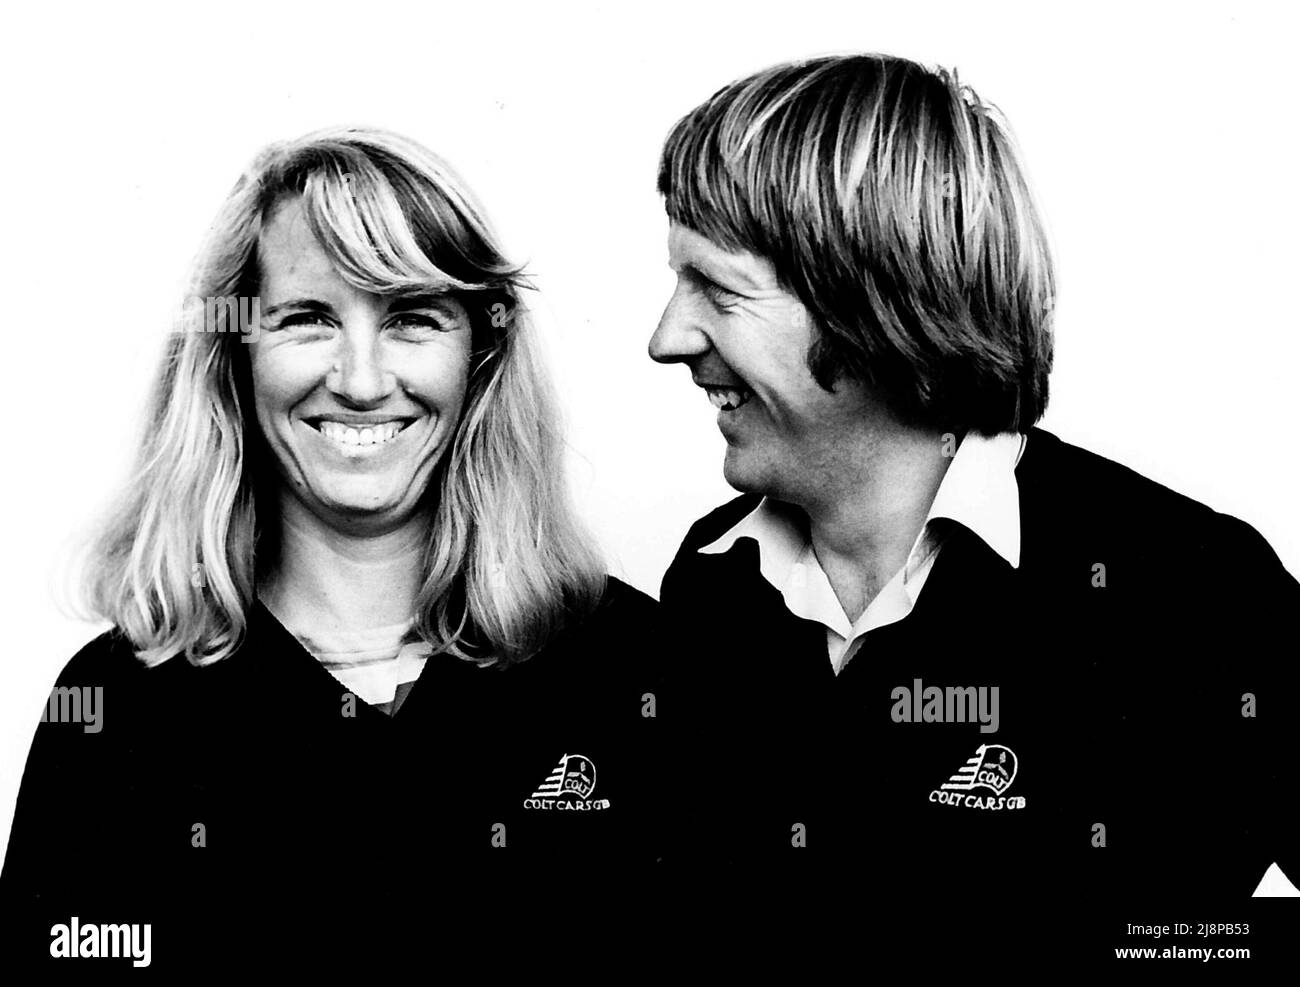 AJAXNETPHOTO. 9TH JULY, 1982. PLYMOUTH, ENGLAND. - BINATONE ROUND BRITAIN RACE FAVOURITES - (L-R) DAME NAOMI AND ROBERT JAMES TOGETHER BEFORE THE START TOOK THE LEAD IMMEDIATELY AFTER RACE START AND WON IN THEIR  60FT TRIMARAN COLT CARS GB.  PHOTO:JONATHAN EASTLAND/AJAX REF:820709 1 5 Stock Photo